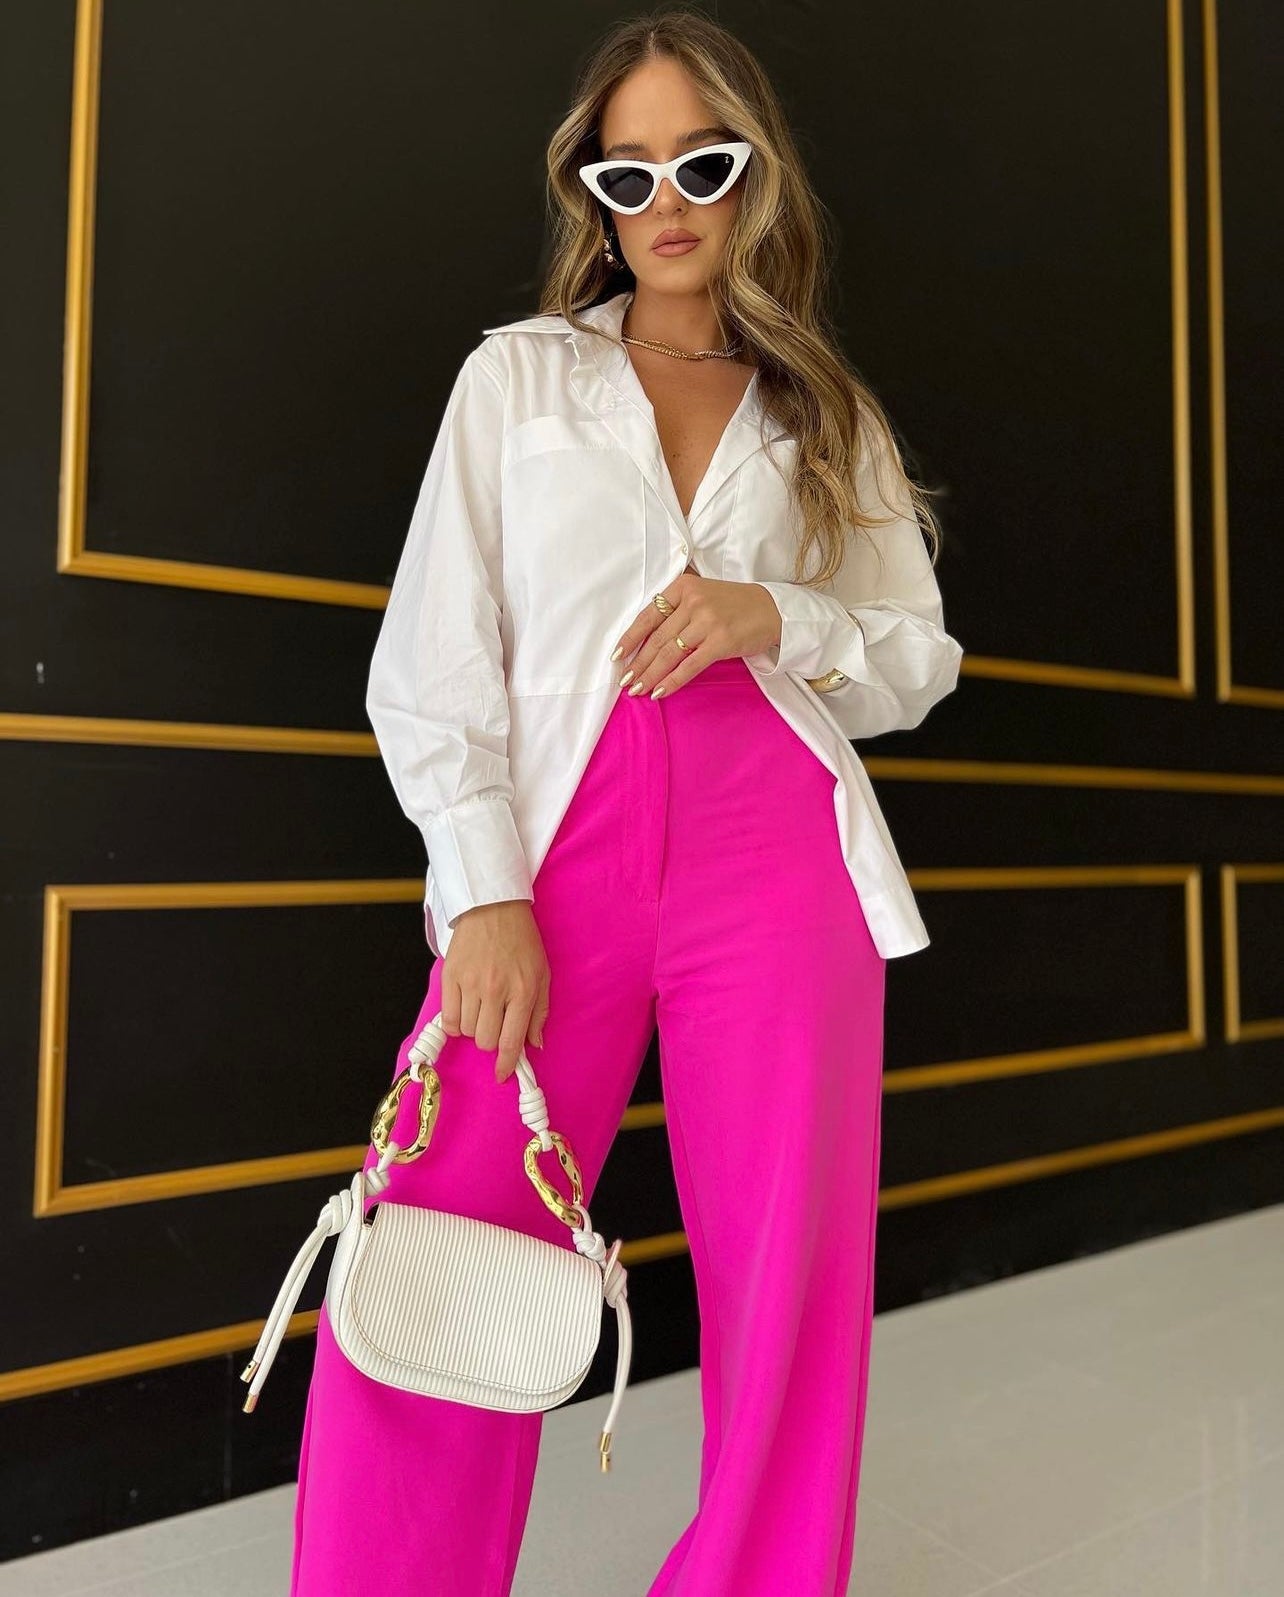 How to Wear Pink Jeans: 15 Amazing Outfit Ideas for Ladies - FMag.com | Pink  pants outfit, Pink jeans outfit, Pink jeans